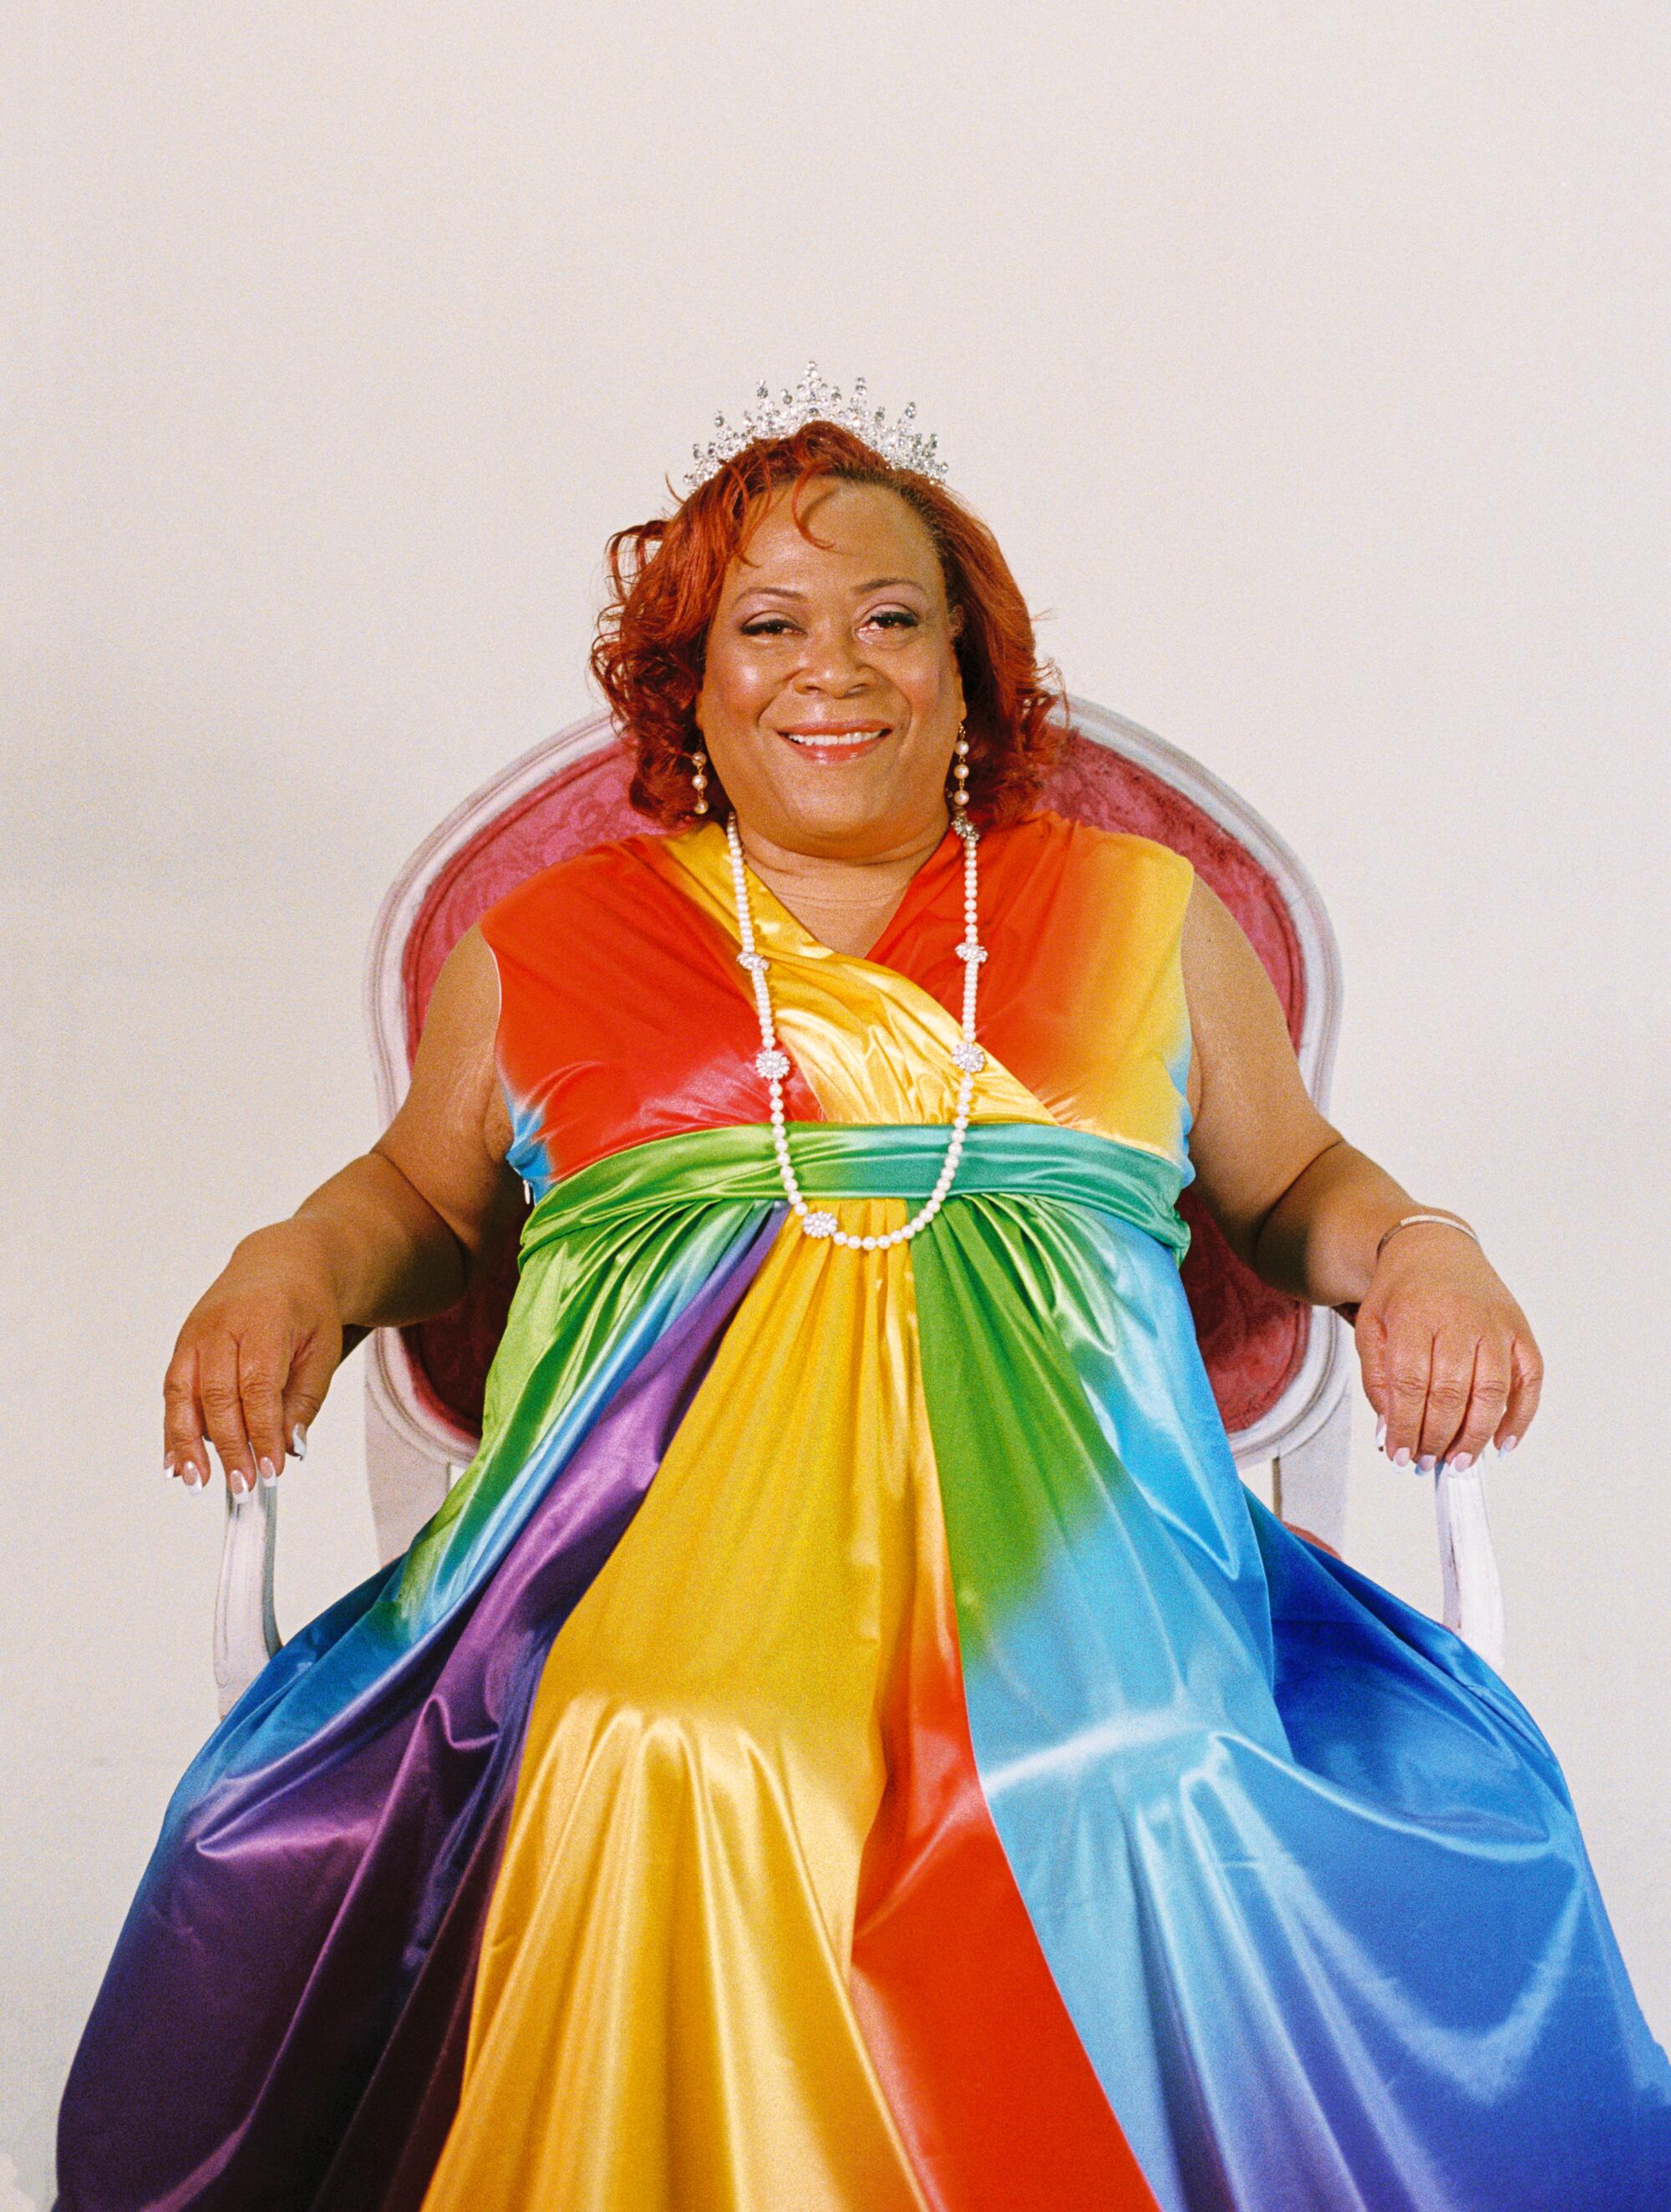 Queen Chela Demuir (she/her, Queen) founder and executive director of the Unique Woman's Coalition.